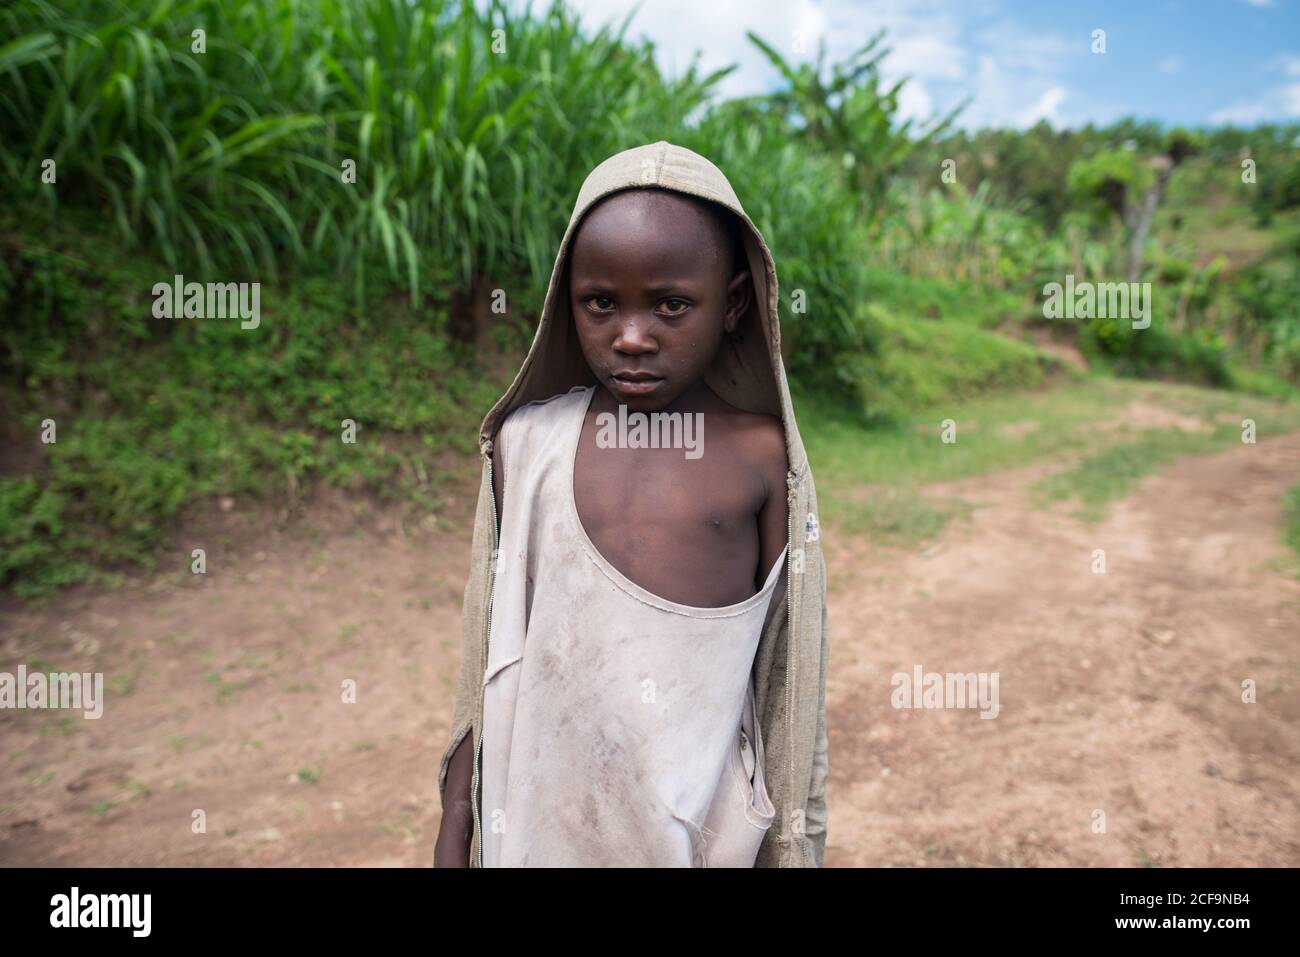 Ruanda, Africa - December 14, 2019: Miserable little African boy in dirty clothes walking on road in green rural land looking at camera Stock Photo